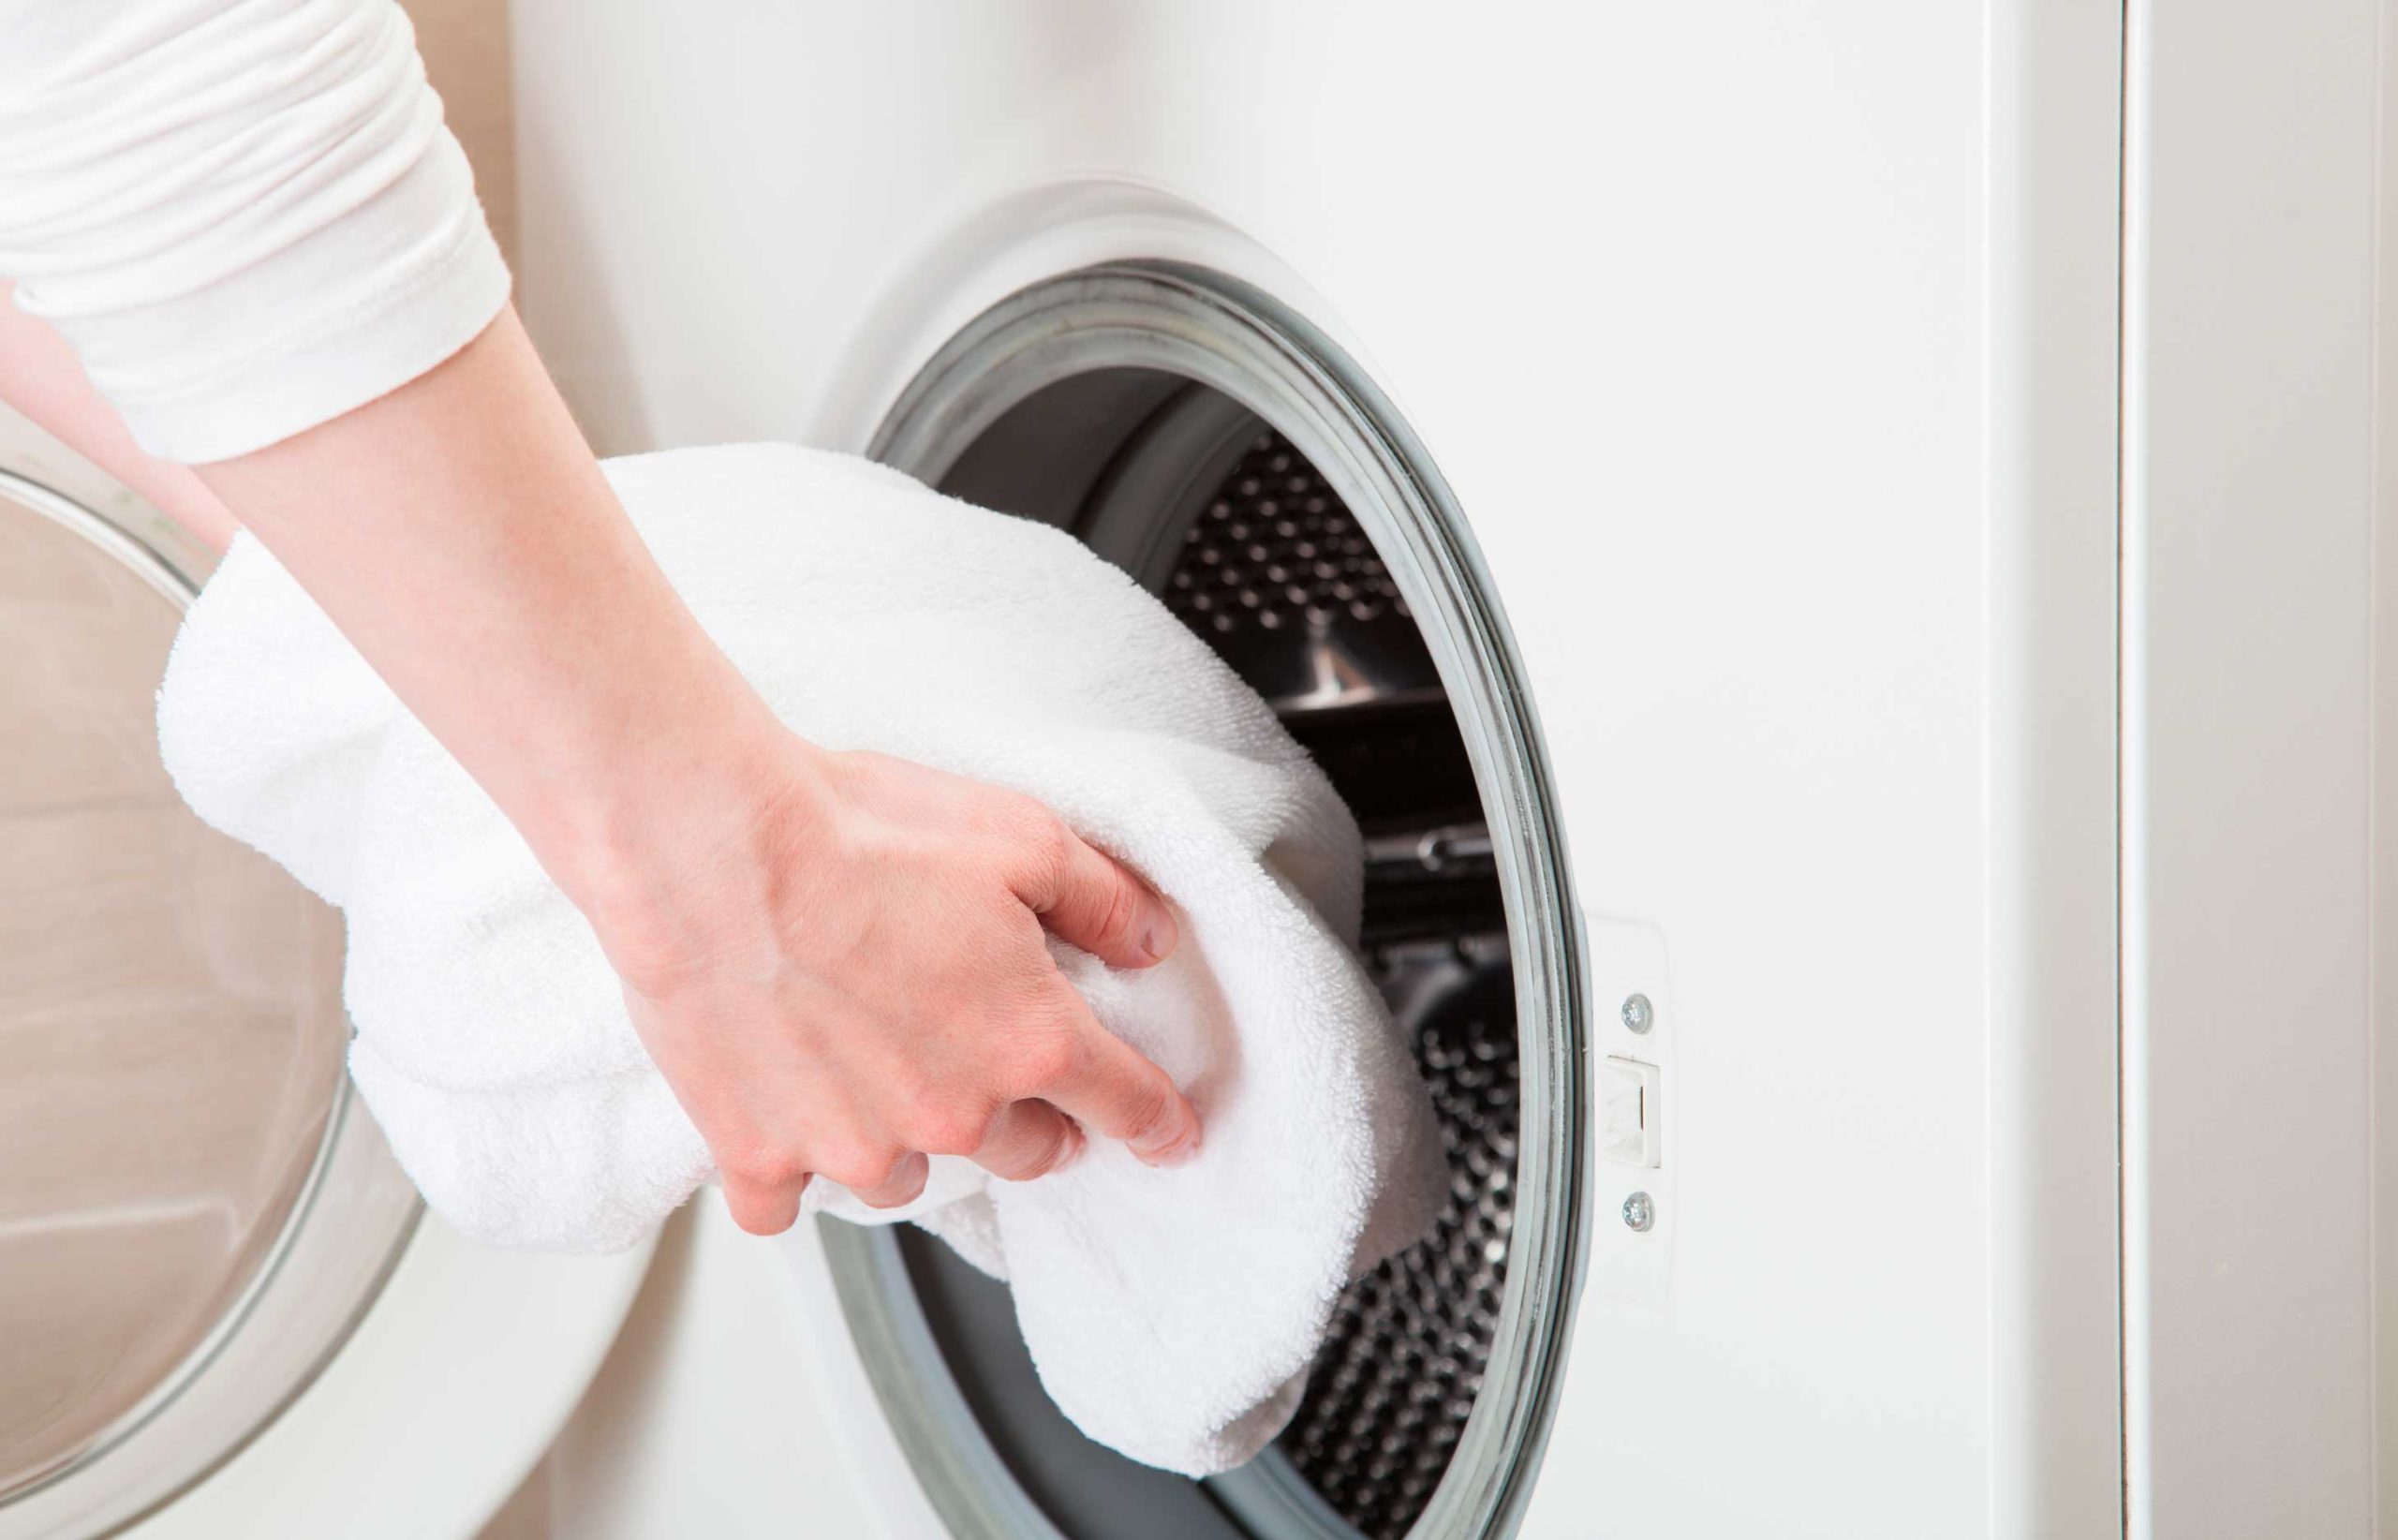 Mr-Jeff_Lifestyle_Services_Putting-clothes-in-washing-machine_01